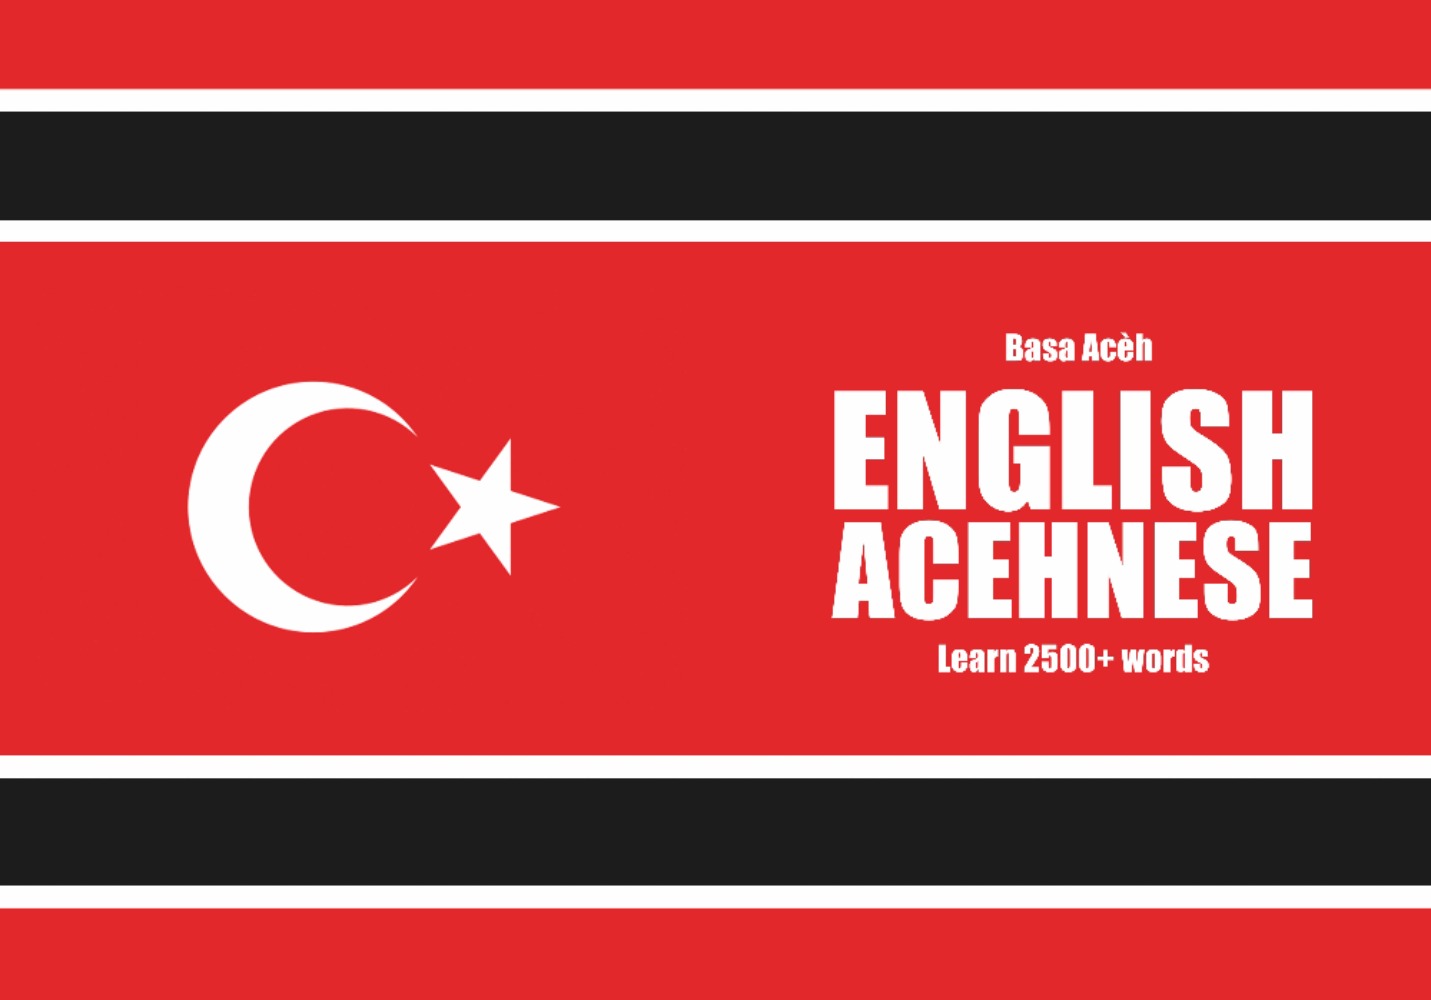 Acehnese language learning notebook cover